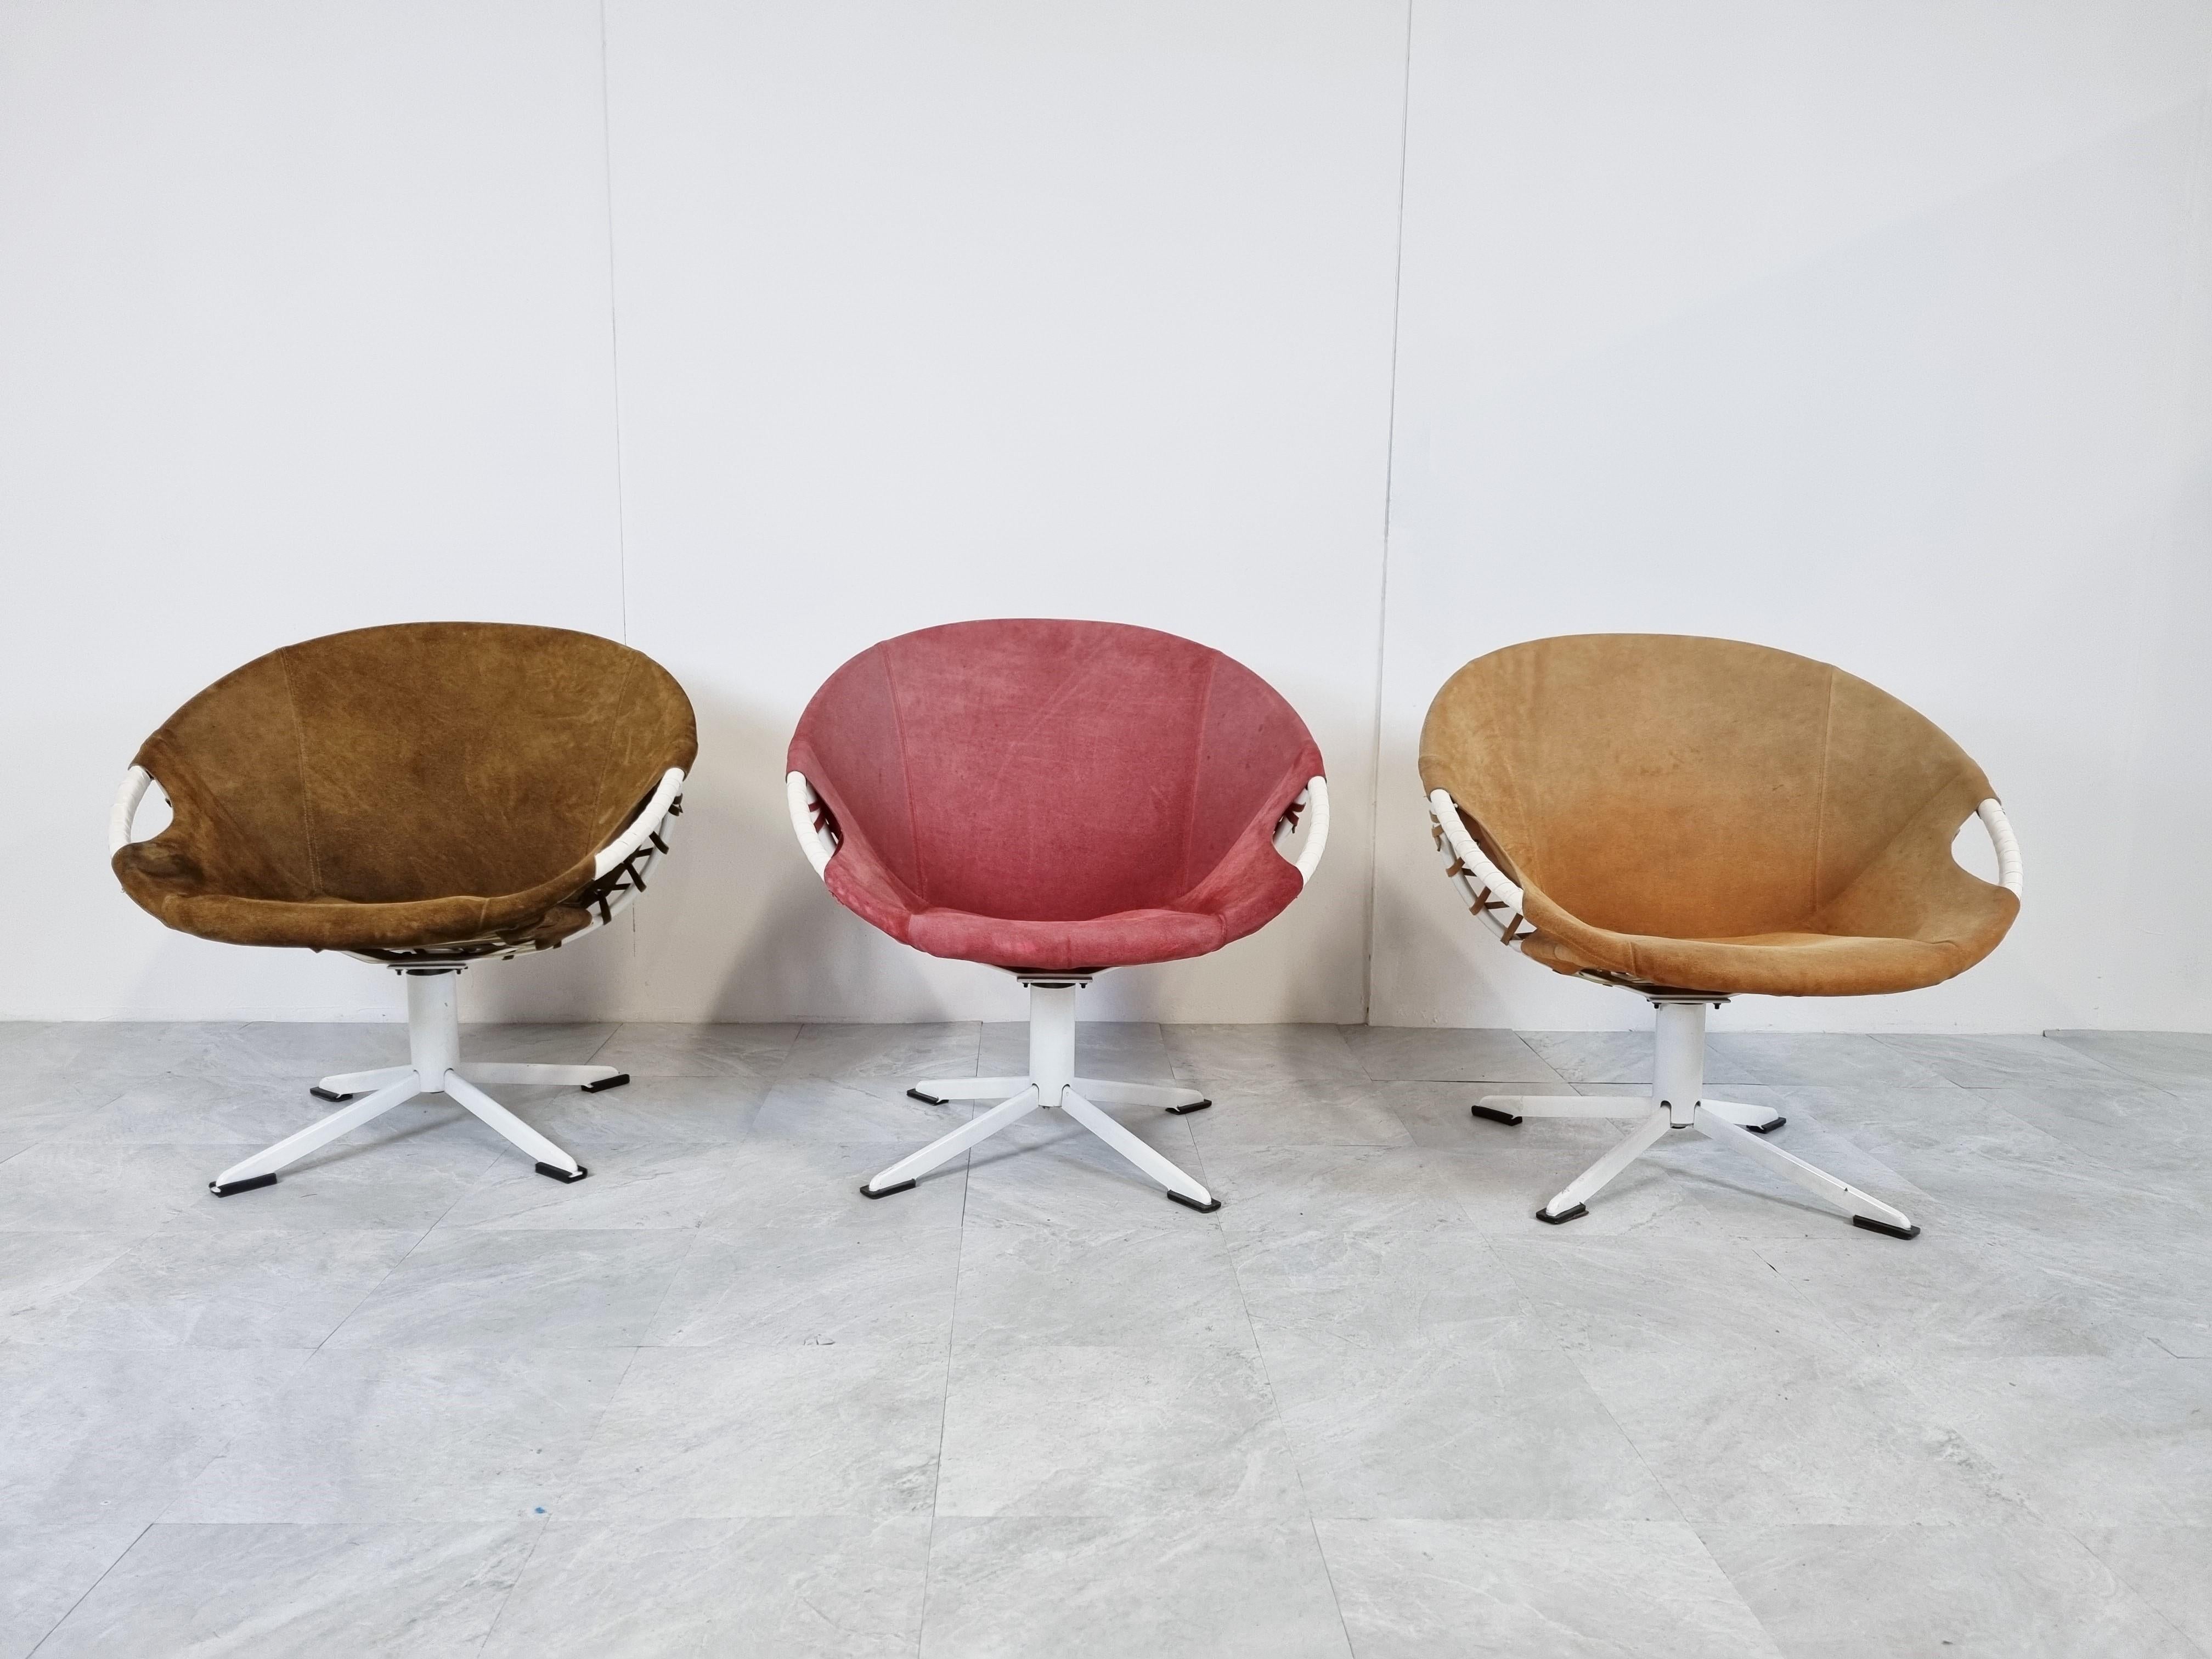 Set of 3 colourful suede swivel chairs called 'balloon' chairs Designed by Lusch Erzeugnis for Lush & Co.

The chairs have a beautiful colour and have their original upholstery.

White metal bases.

Great vintage look!

Good